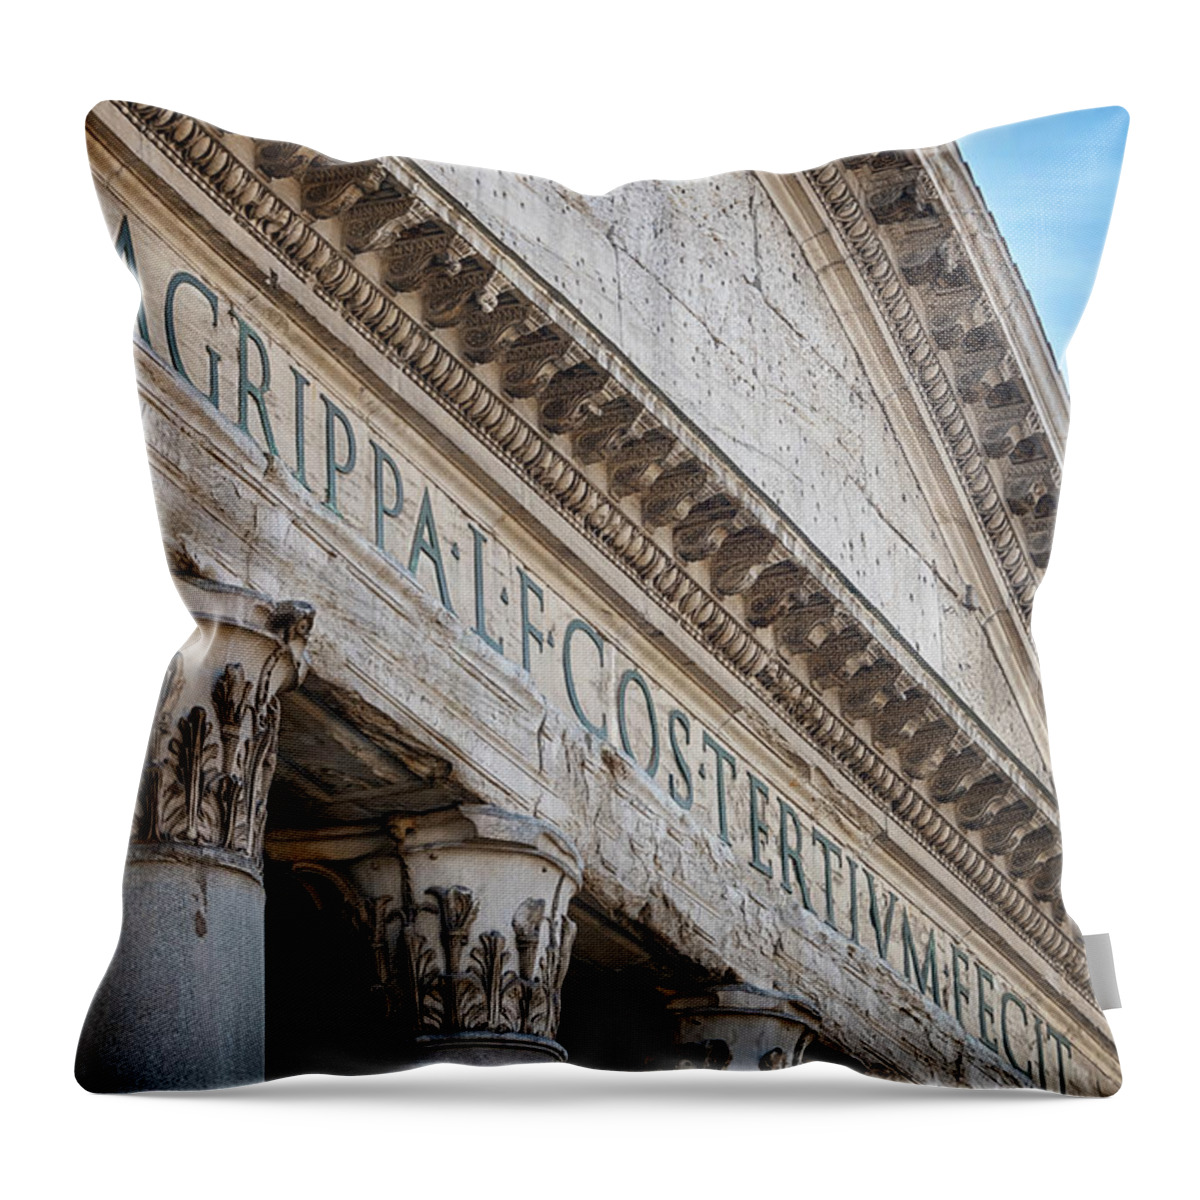 Joan Carroll Throw Pillow featuring the photograph Pantheon Rome Italy by Joan Carroll